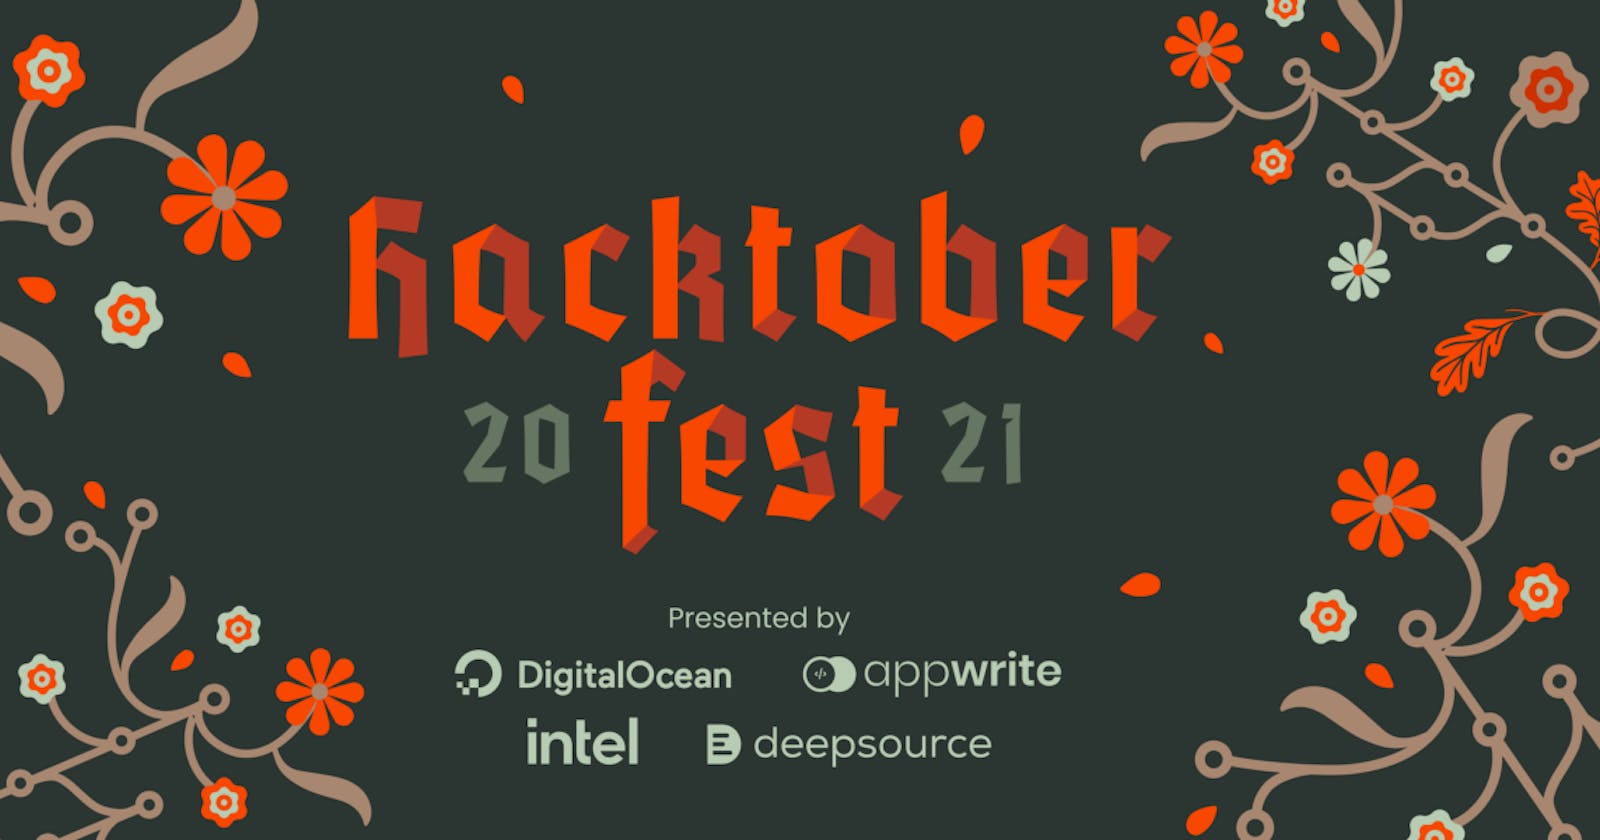 Everything you need to know about Hactoberfest!